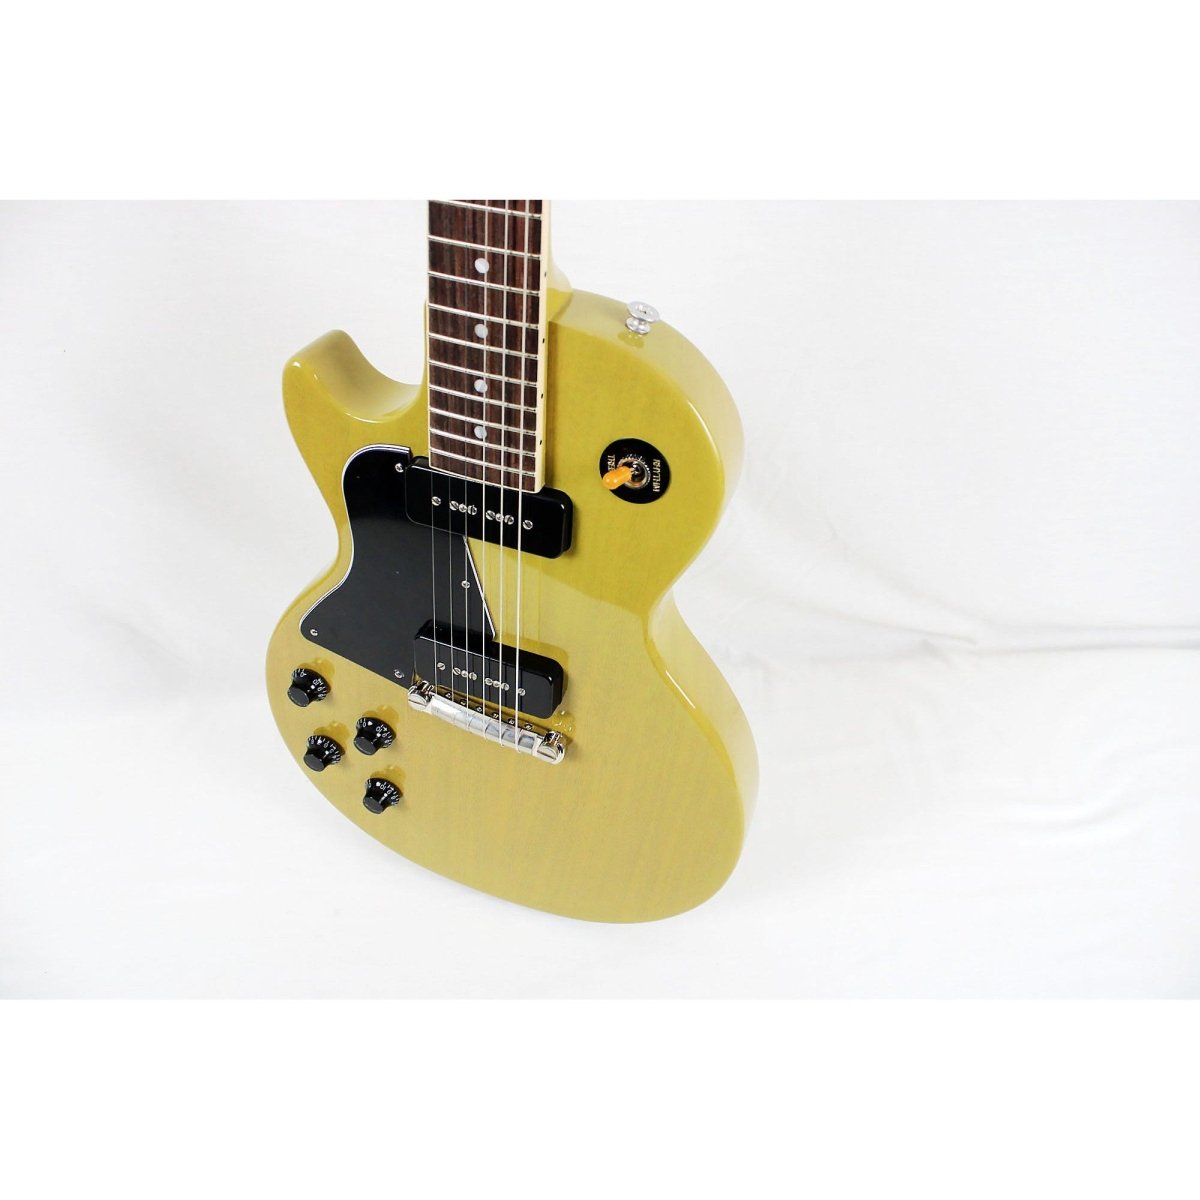 Gibson Les Paul Special Left-handed - TV Yellow **USED - MINT** - Leitz Music--203840200